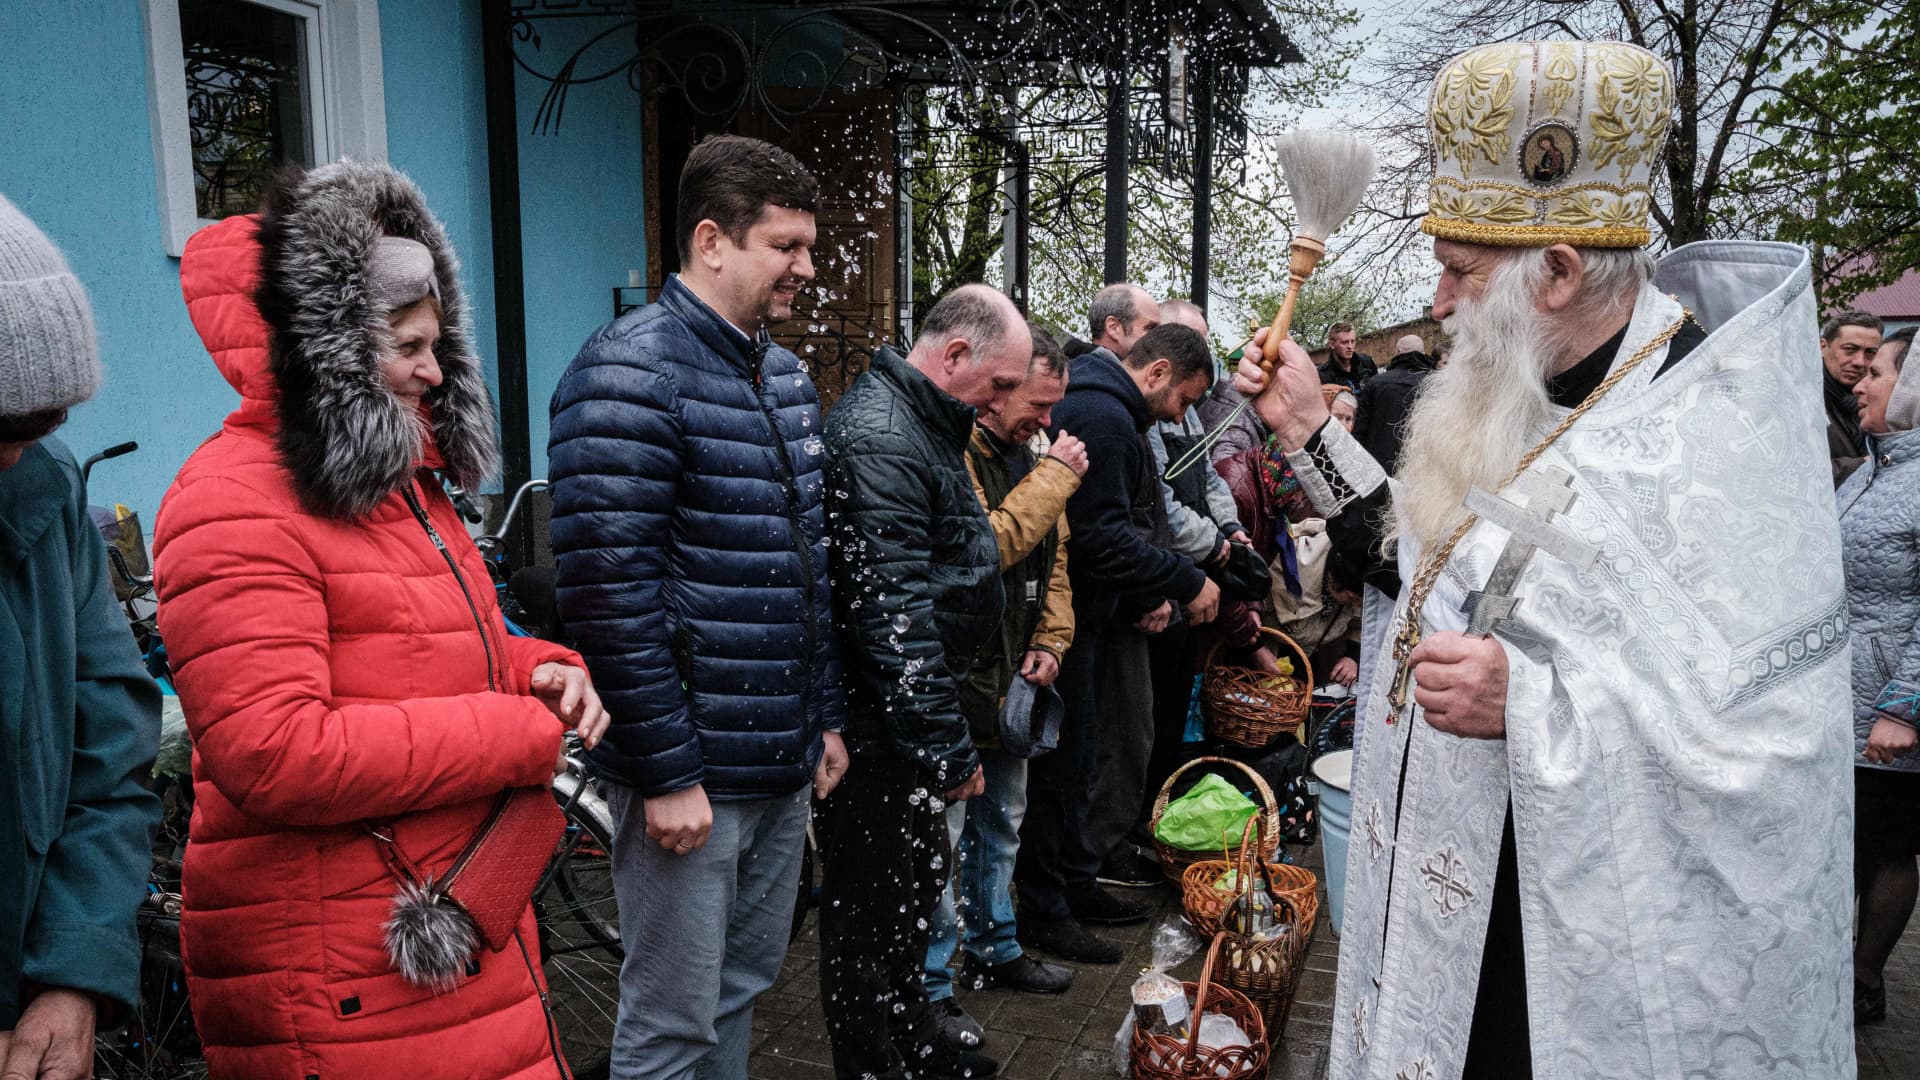 Worshippers receive a sanctification during an Orthodox Easter service with continuous sounds of shelling in the distance at St. Peter and Paul church in Lyman, eastern Ukraine, on April 24, 2022, amid the Russian invasion of Ukraine.